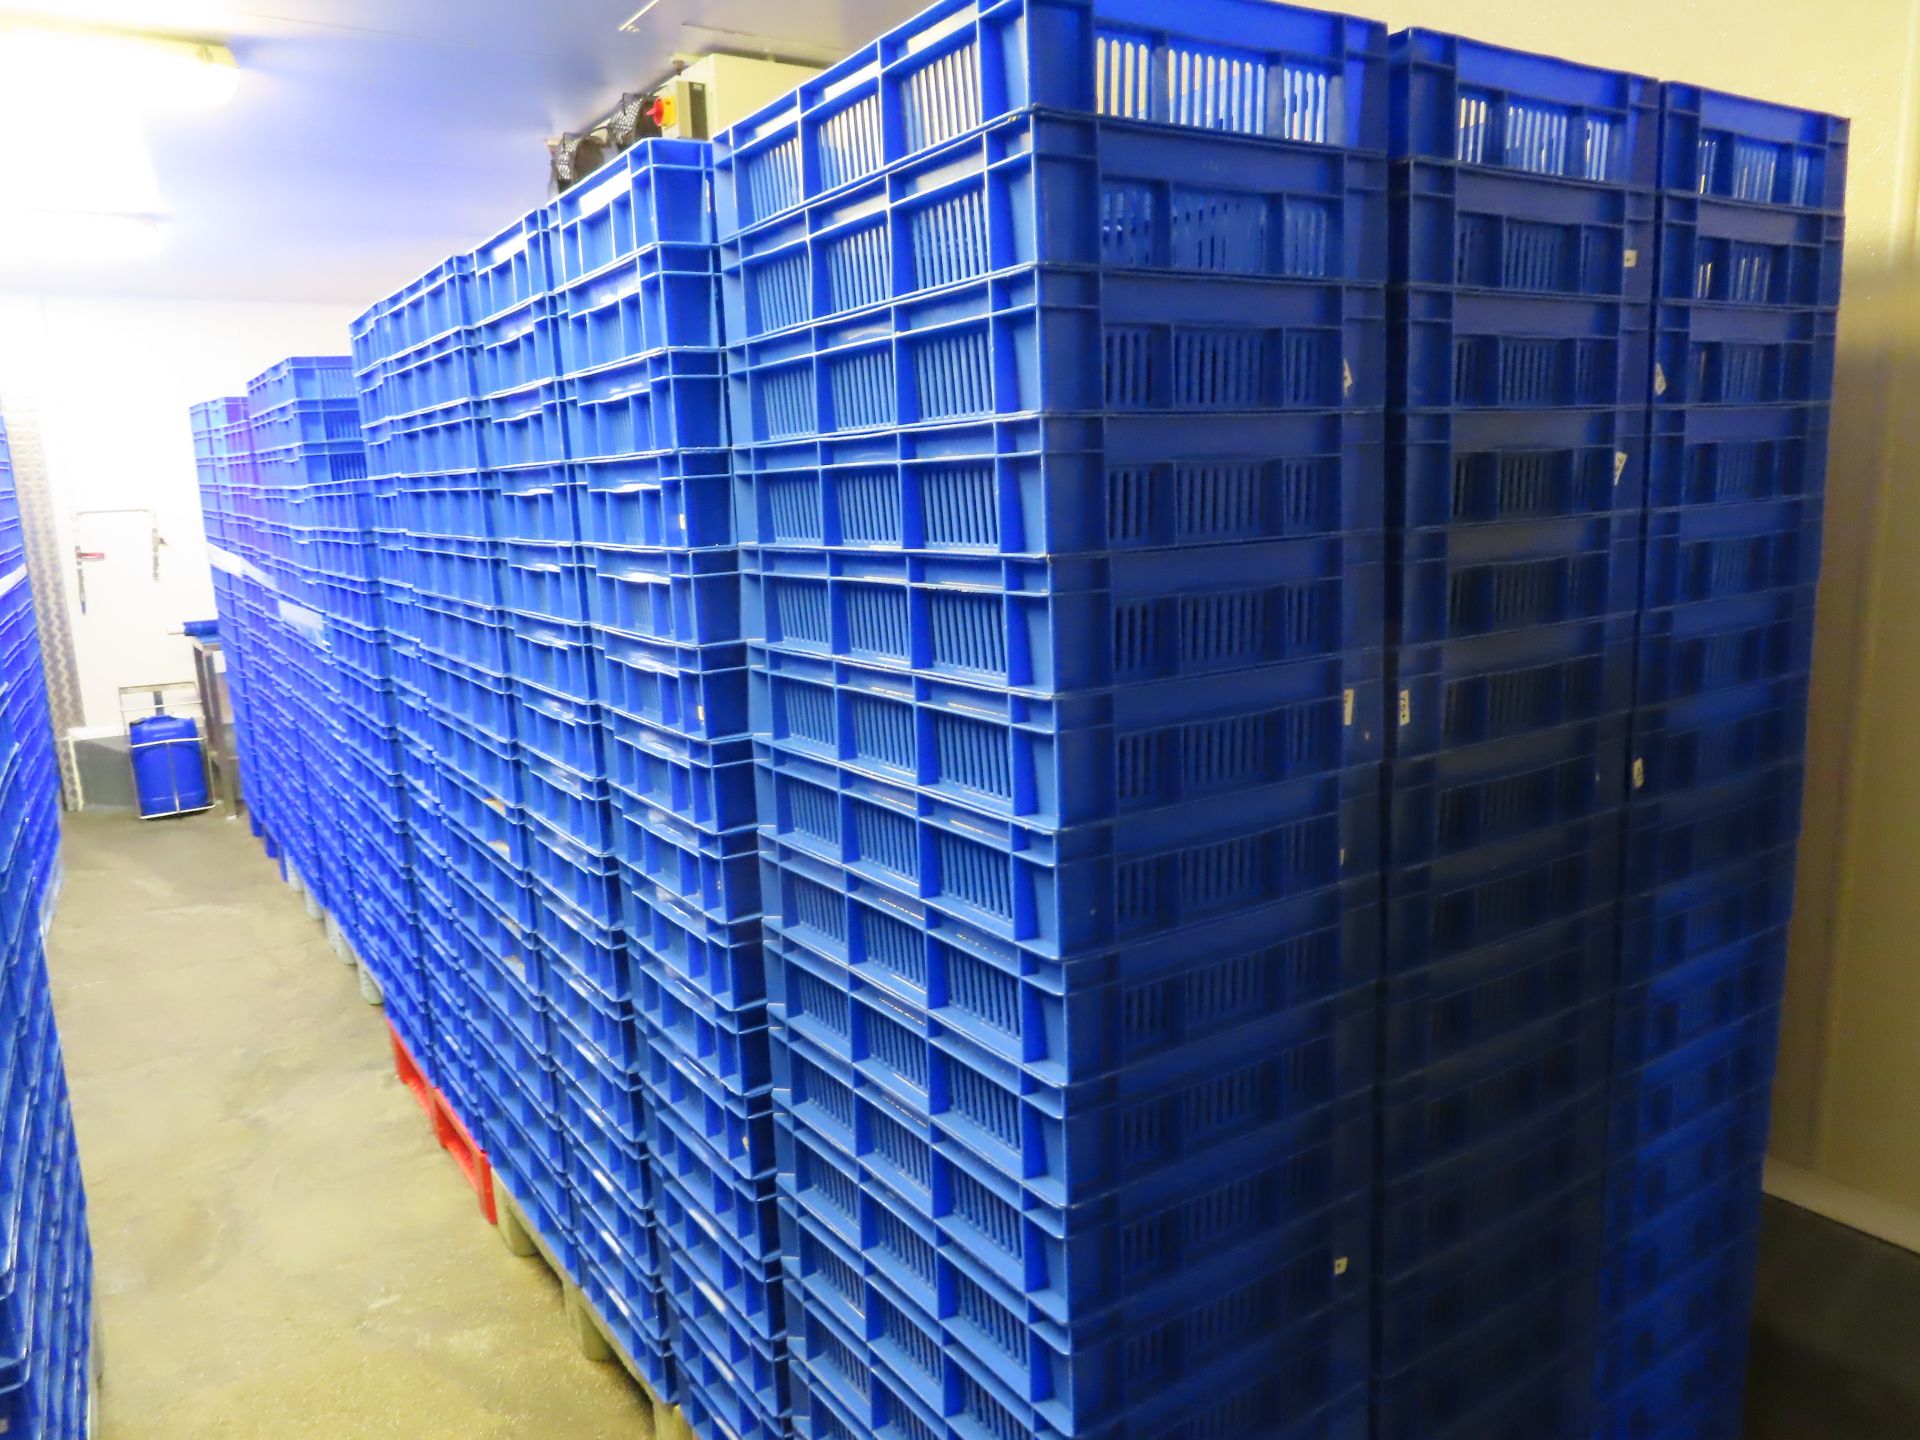 6 X PALLETS OF TRAYS (APPROX. 80 BLUE TRAYS ON EACH PALLET). - Image 5 of 6